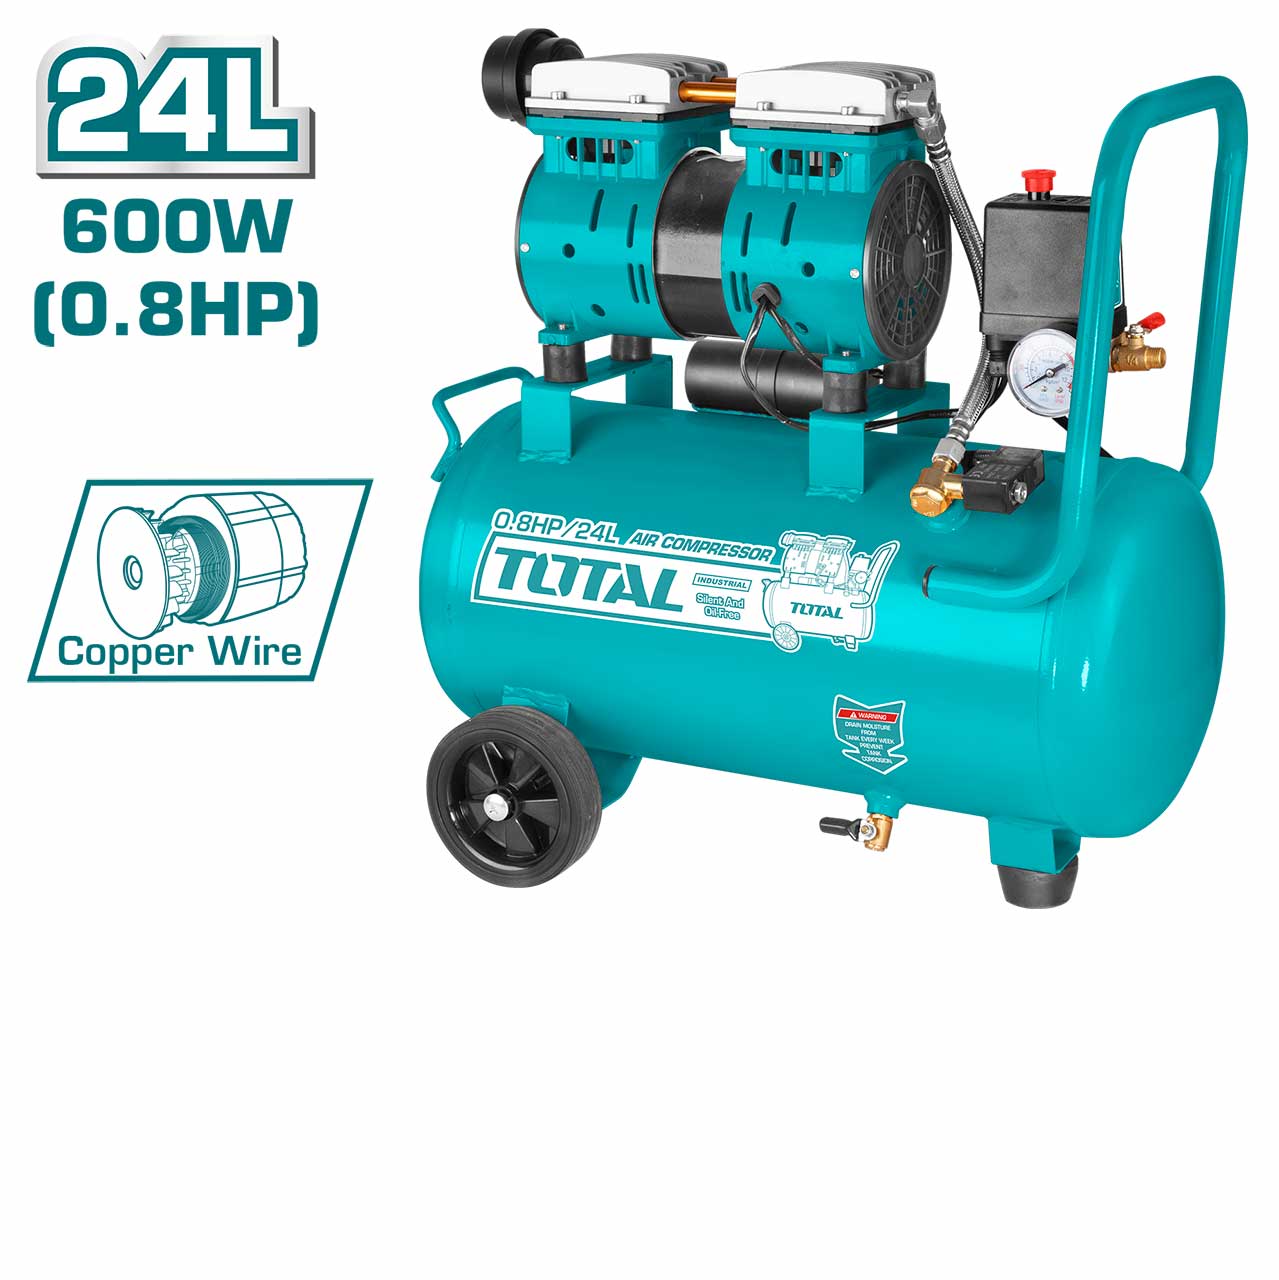 AIR COMPRESSOR SILENT AND OIL FREE 24 Lit